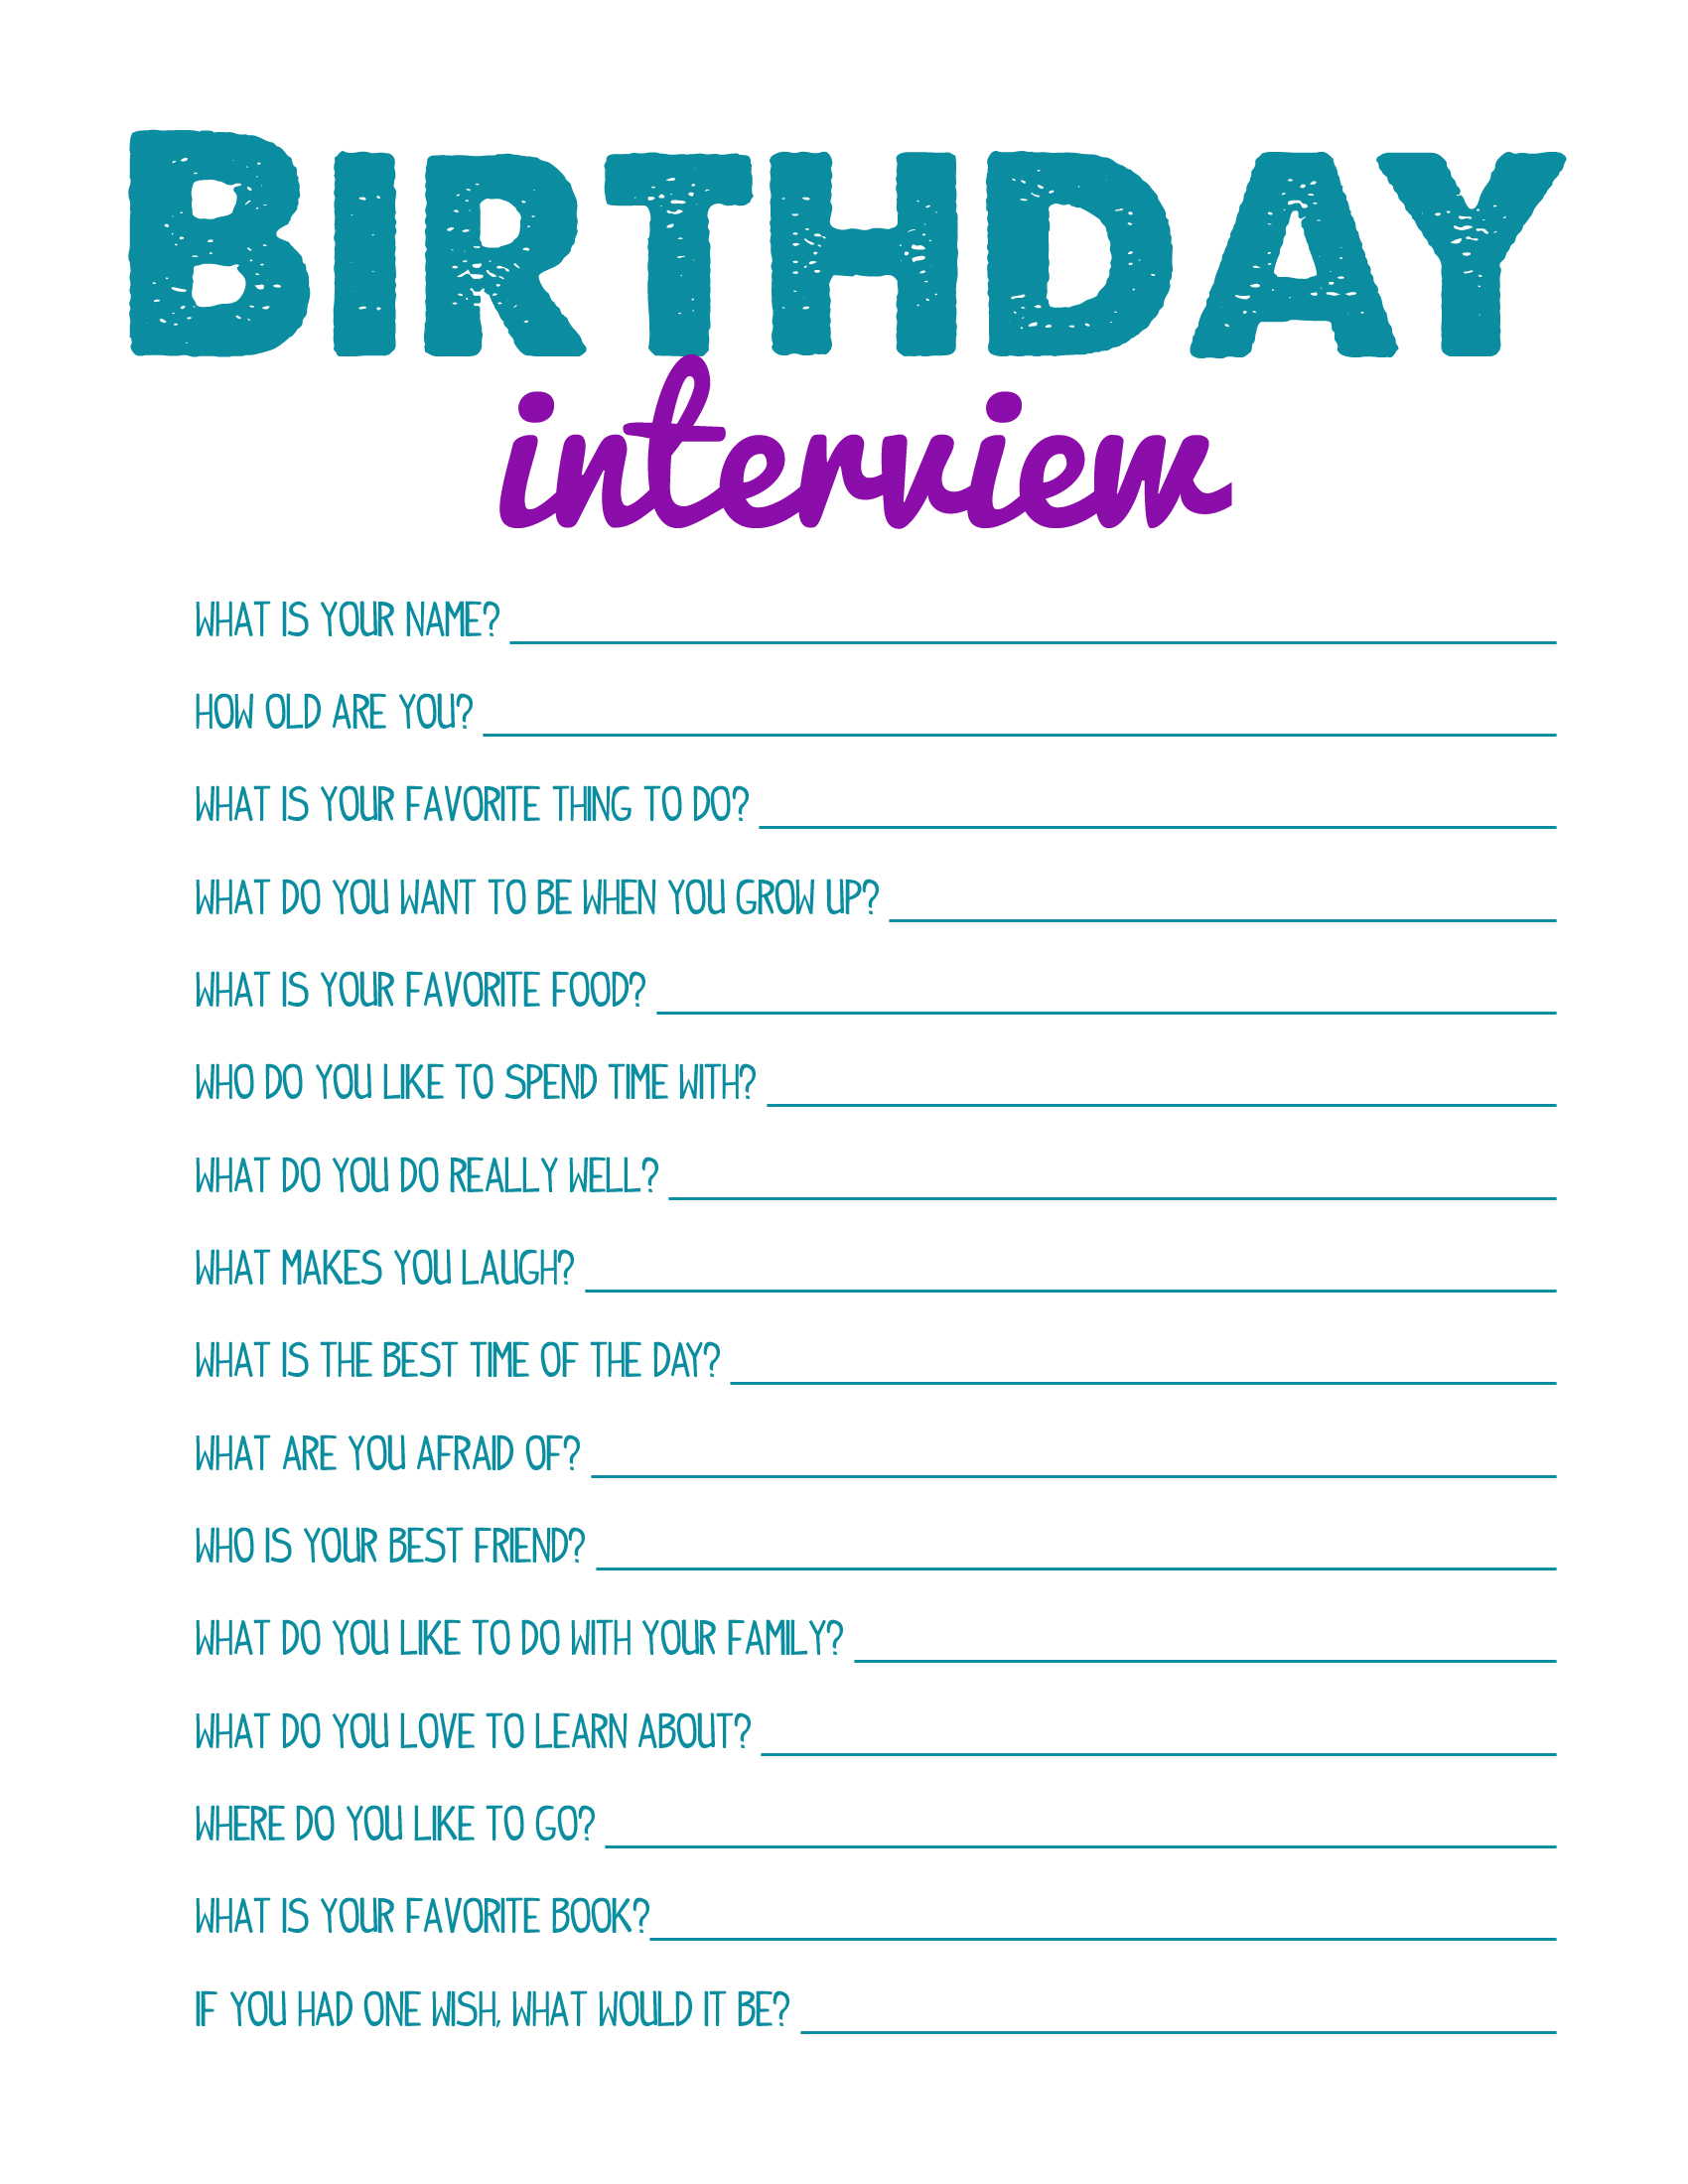 birthday-printable-images-gallery-category-page-2-printablee